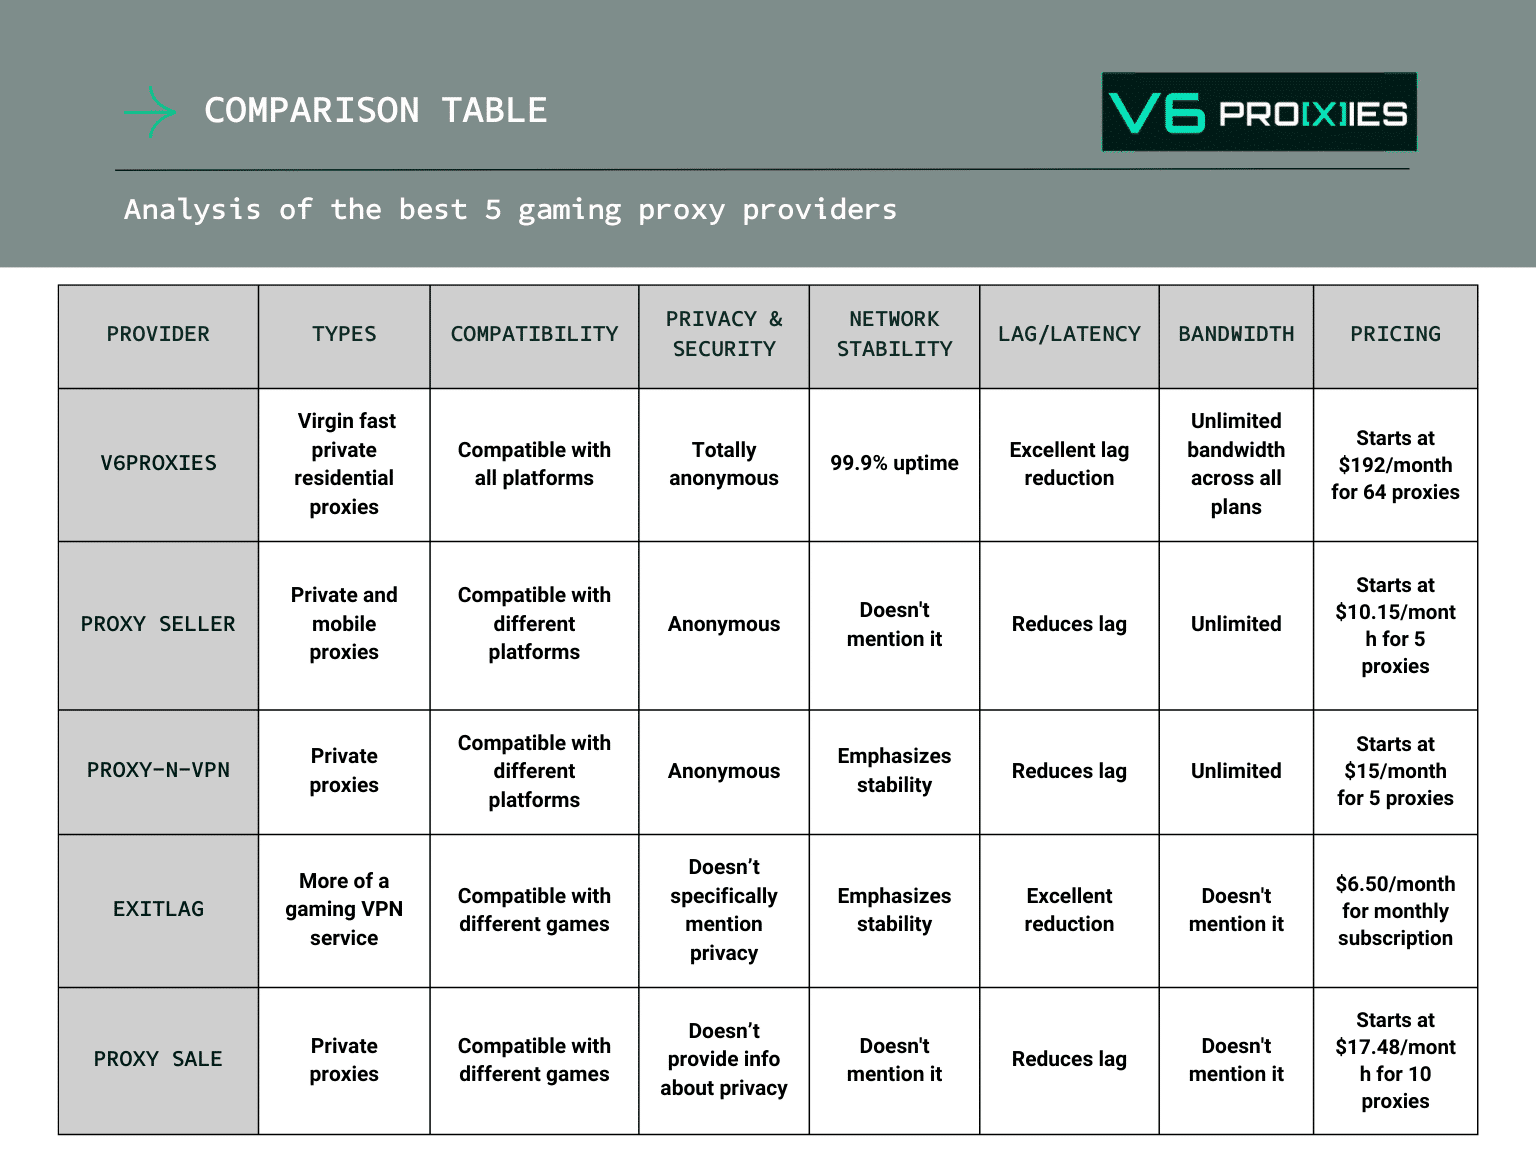 A comparison table titled "Analysis of the best 5 gaming proxy providers" is displayed. It's organized by different criteria: PROVIDER: V6PROXIES PROXY SELLER PROXY-N-VPN EXITLAG PROXY SALE TYPES: V6PROXIES: Virgin fast private residential proxies PROXY SELLER: Private and mobile proxies PROXY-N-VPN: Private proxies EXITLAG: More of a gaming VPN service PROXY SALE: Private proxies COMPATIBILITY: All providers are compatible with different platforms or games. PRIVACY & SECURITY: V6PROXIES: Totally anonymous PROXY SELLER: Anonymous PROXY-N-VPN: Anonymous EXITLAG: Doesn't specifically mention privacy PROXY SALE: Doesn't provide info about privacy NETWORK STABILITY: V6PROXIES: 99.9% uptime PROXY SELLER: Doesn't mention it PROXY-N-VPN: Emphasizes stability EXITLAG: Emphasizes stability PROXY SALE: Doesn't mention it LAG/LATENCY: V6PROXIES: Excellent lag reduction PROXY SELLER: Reduces lag PROXY-N-VPN: Reduces lag EXITLAG: Excellent reduction PROXY SALE: Reduces lag BANDWIDTH: V6PROXIES: Unlimited bandwidth across all plans PROXY SELLER: Unlimited PROXY-N-VPN: Unlimited EXITLAG: Doesn't mention it PROXY SALE: Doesn't mention it PRICING: V6PROXIES: Starts at $192/month for 64 proxies PROXY SELLER: Starts at $10.15/month for 5 proxies PROXY-N-VPN: Starts at $15/month for 5 proxies EXITLAG: $6.50/month for monthly subscription PROXY SALE: Starts at $17.48/month for 10 proxies The table has a green arrow logo on the top left, and "V6 PROXIES" is written in large text on the top right.